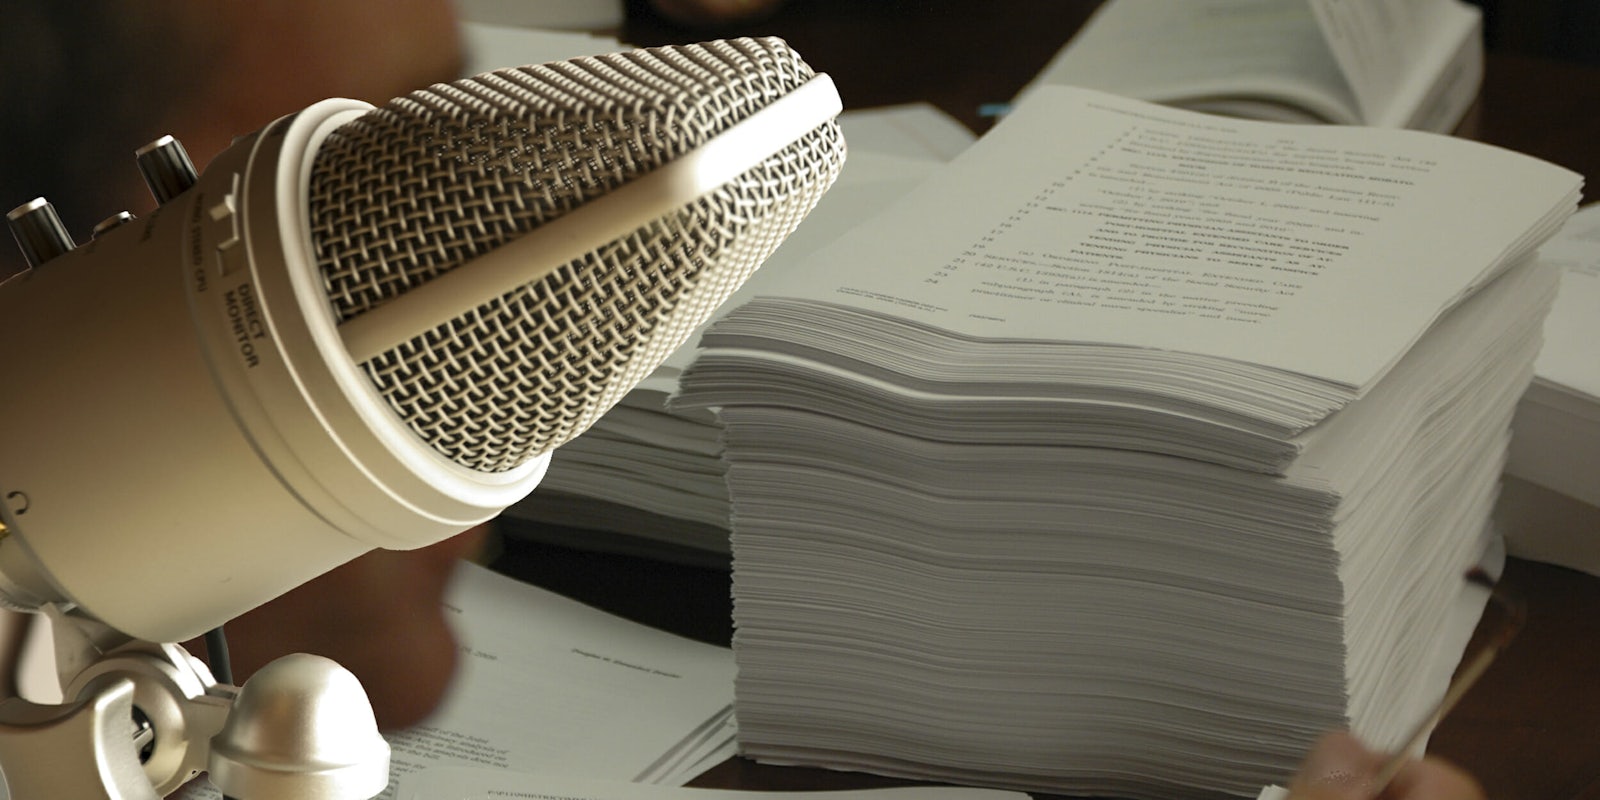 Microphone and stack of papers